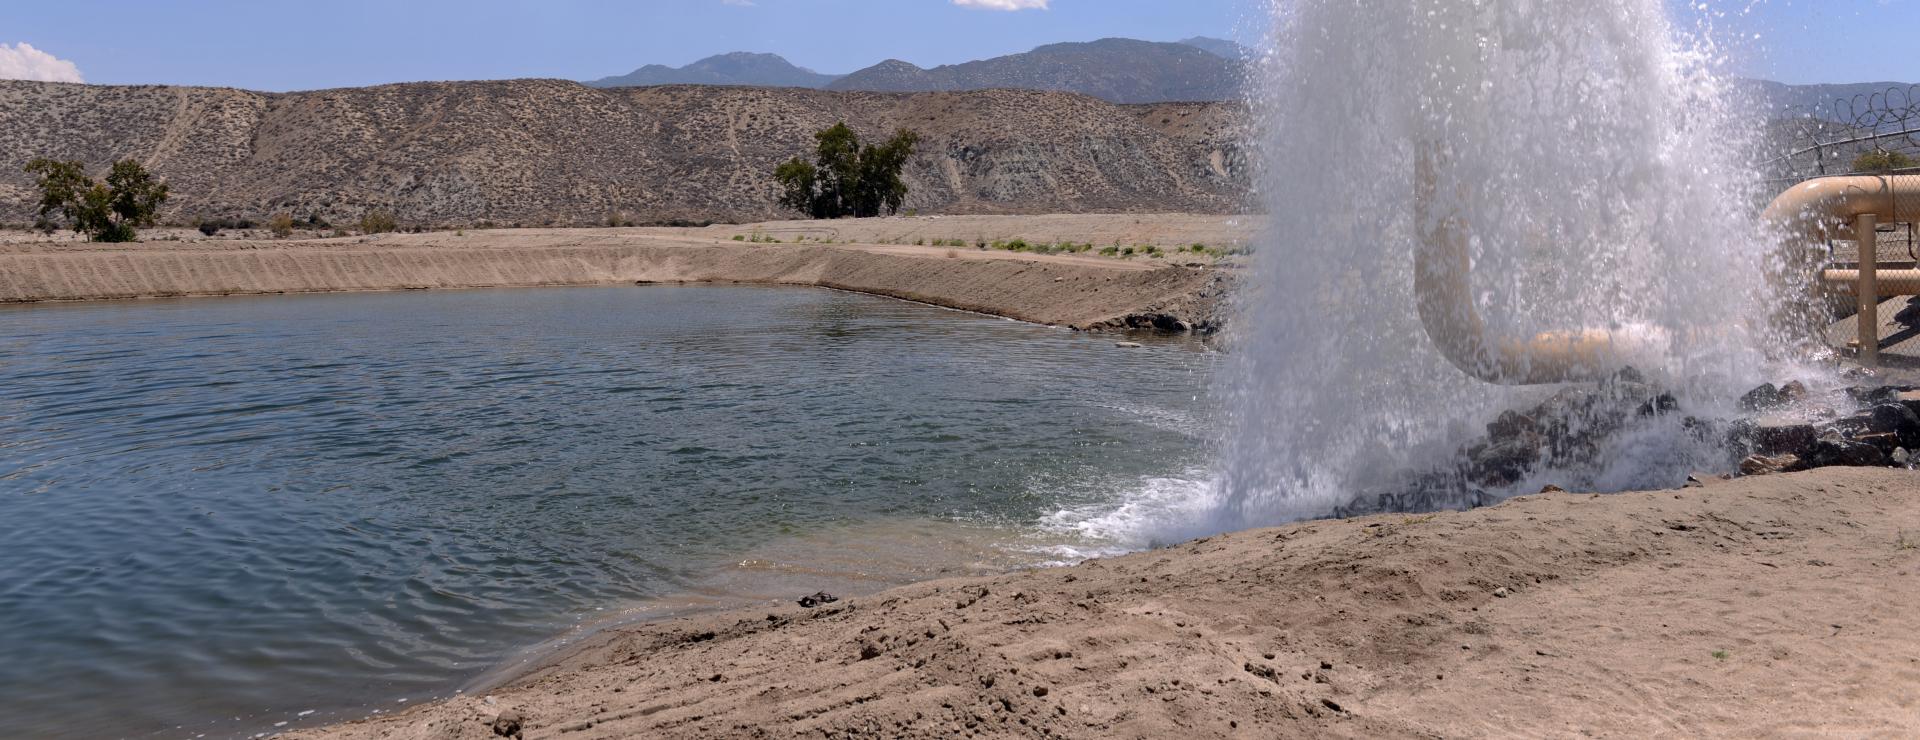 Water spout at groundwater supply pond.